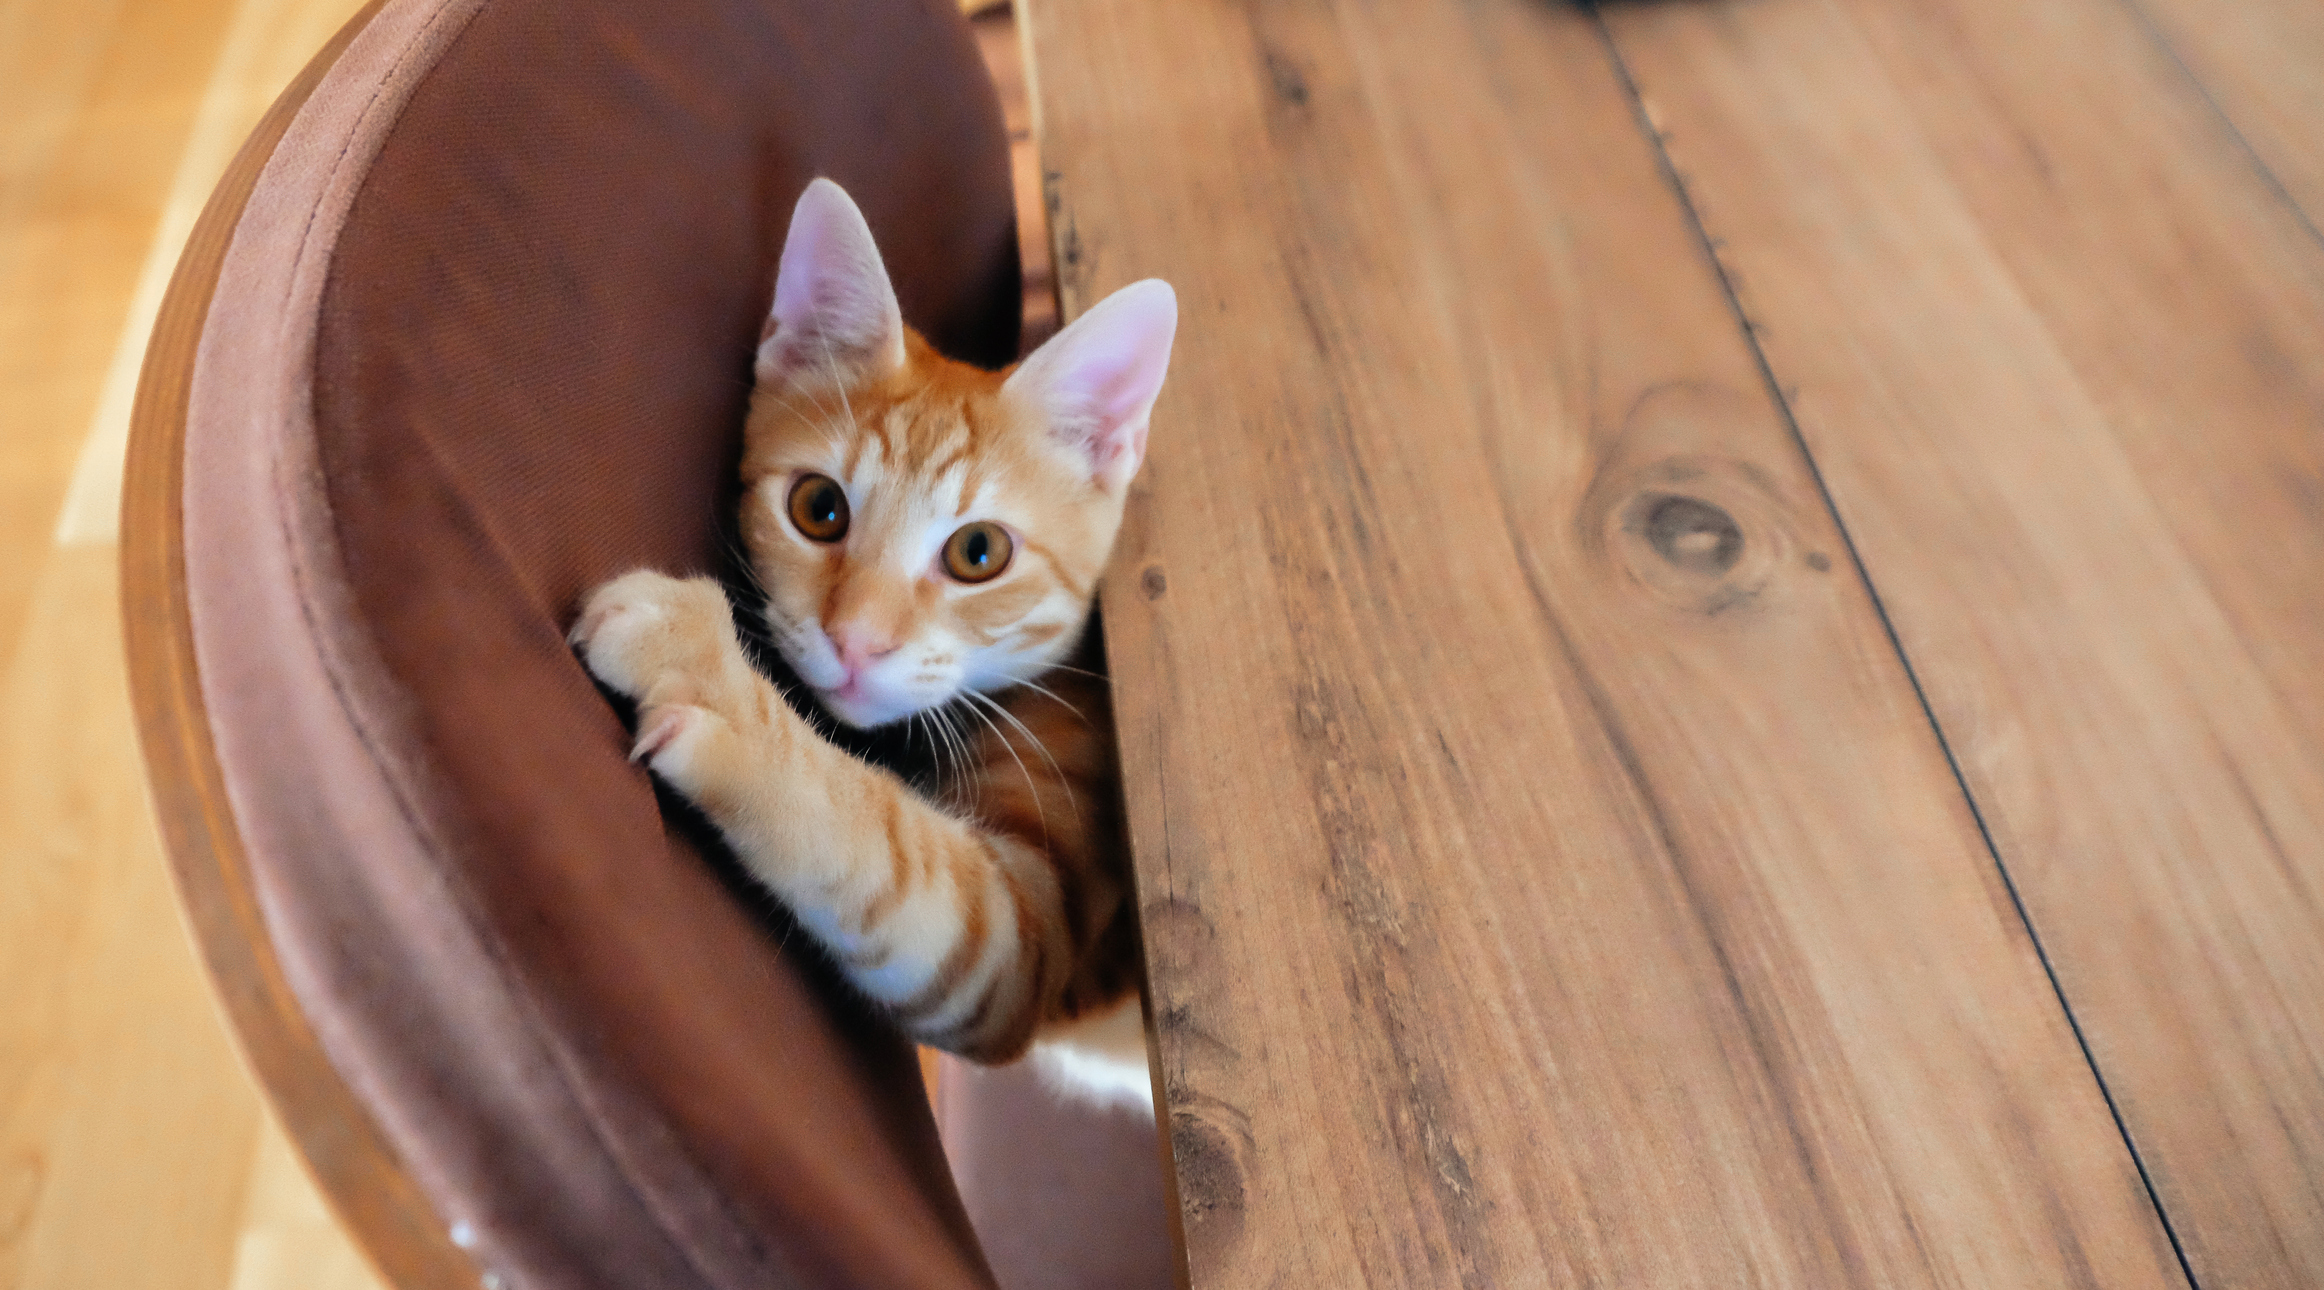 A sneaky orange cat climbs up and scratches a dining chair